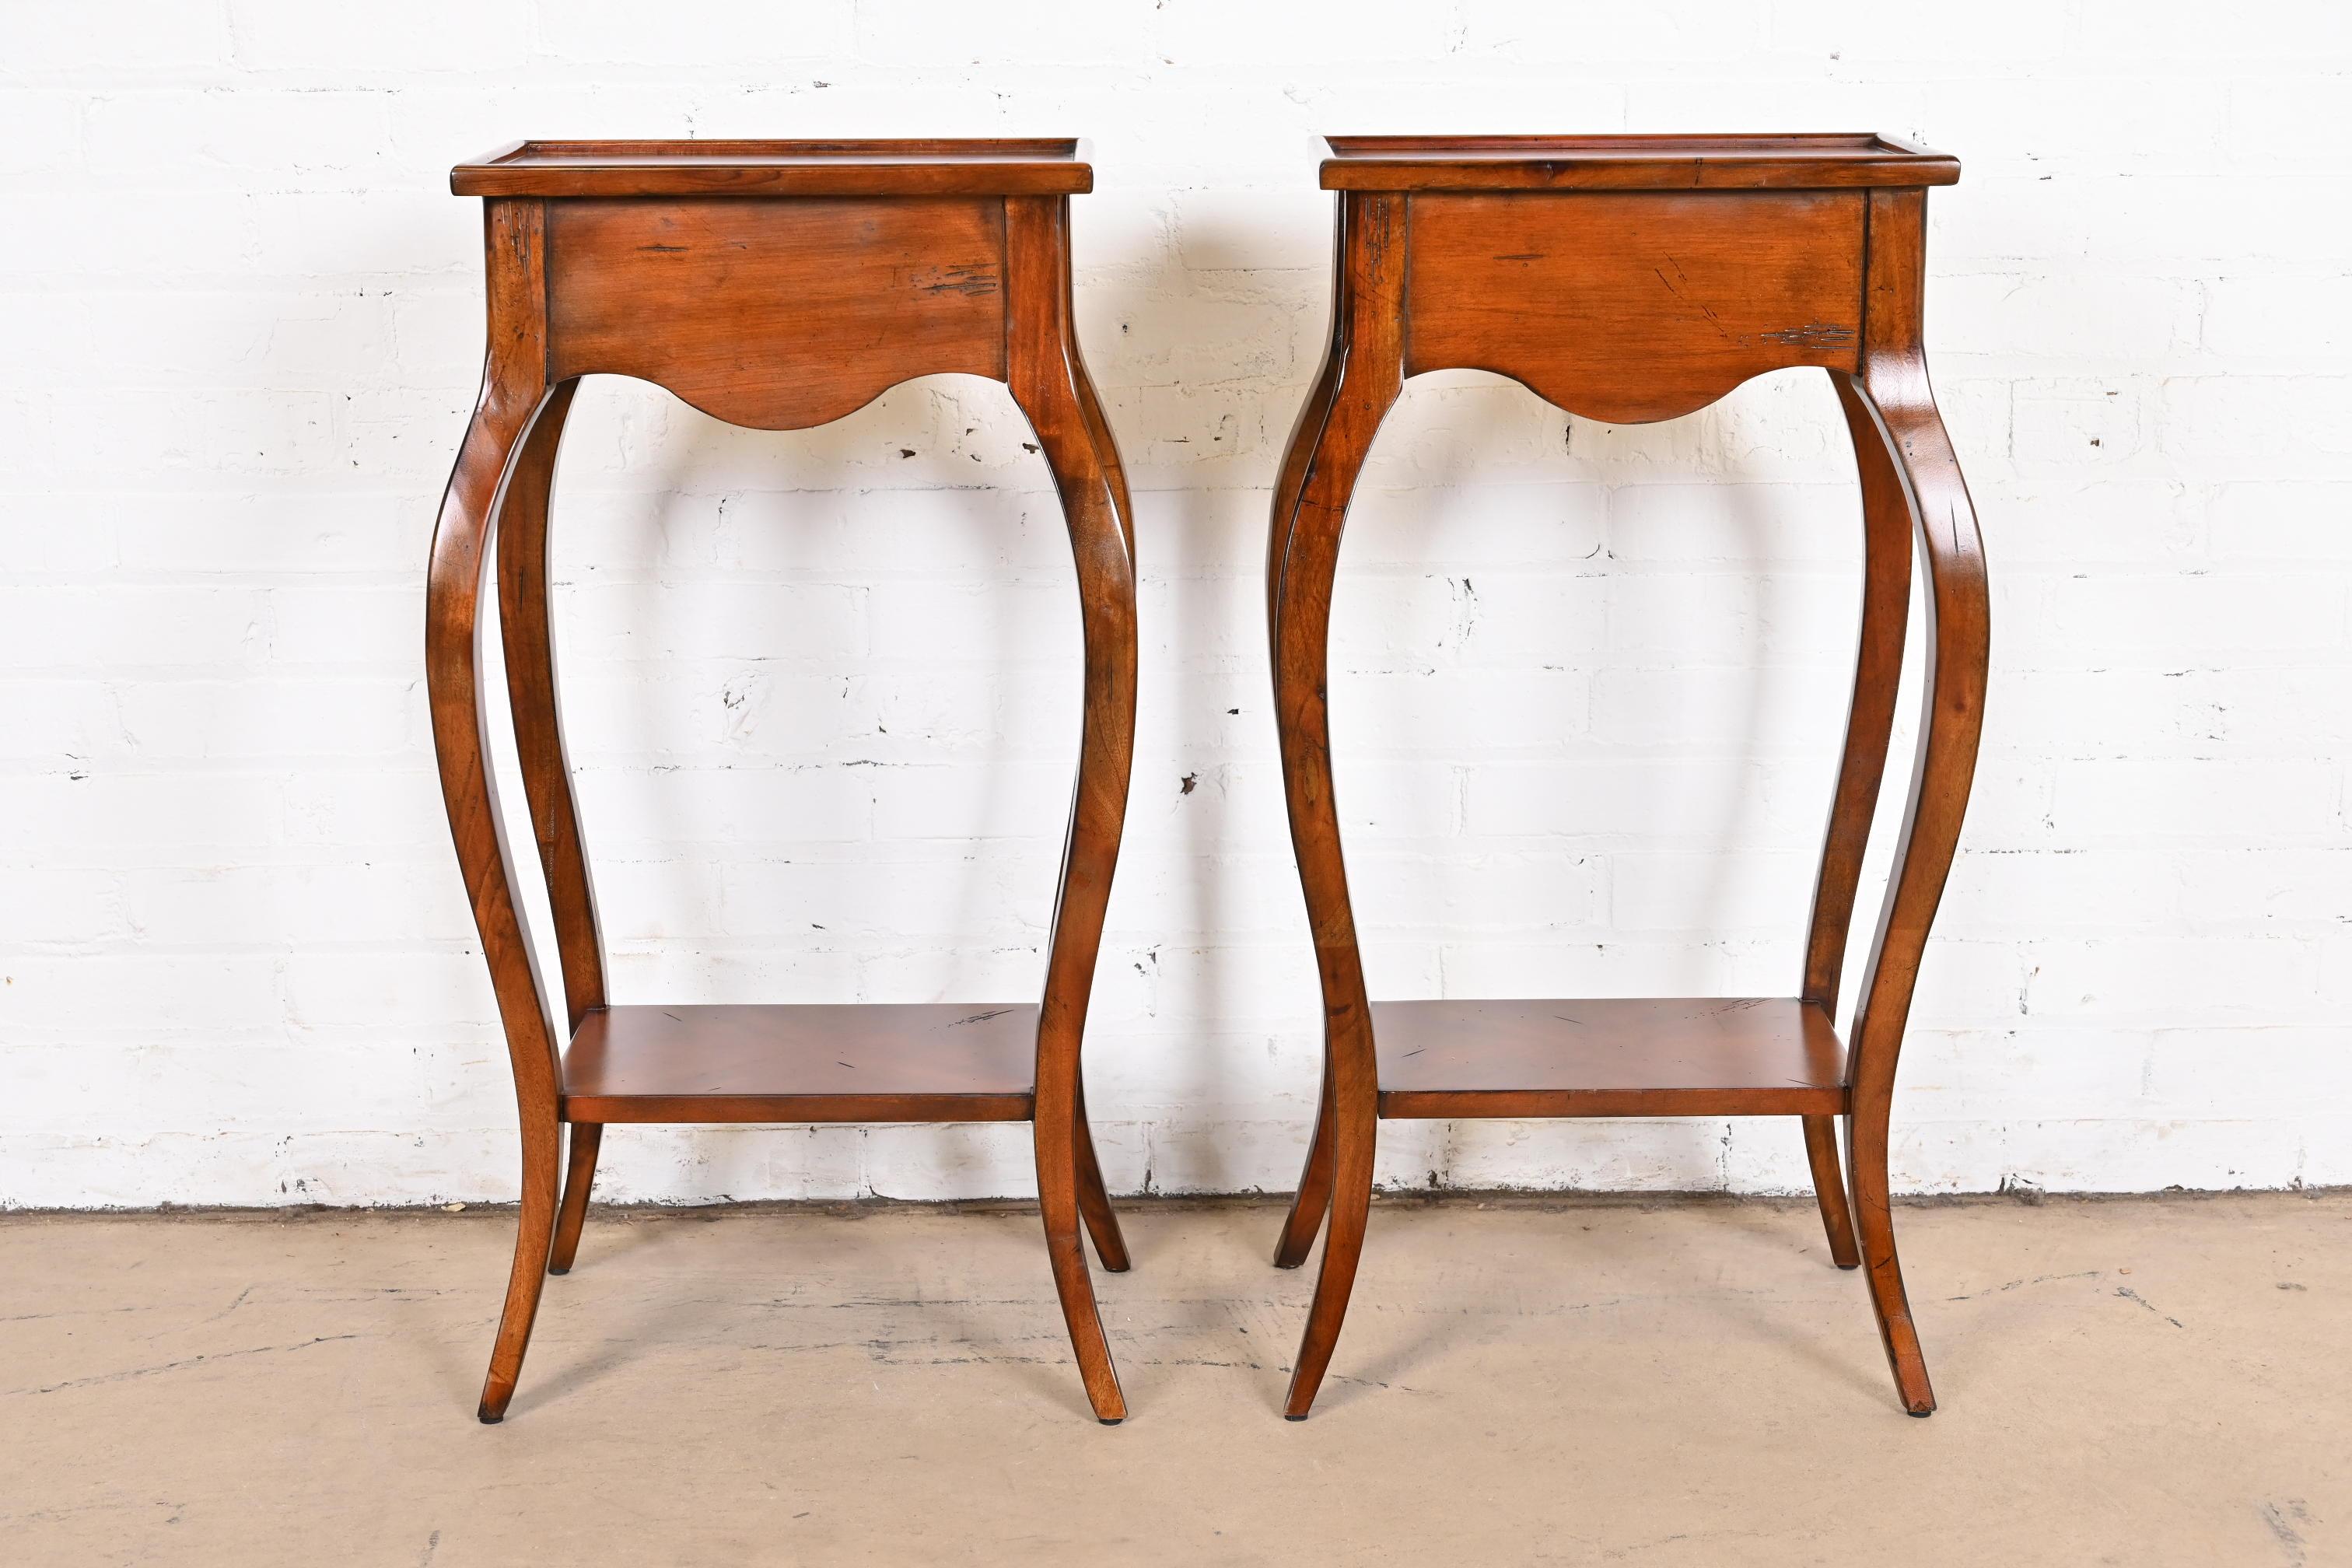 Hekman French Provincial Cherry Wood Nightstands, Pair 9